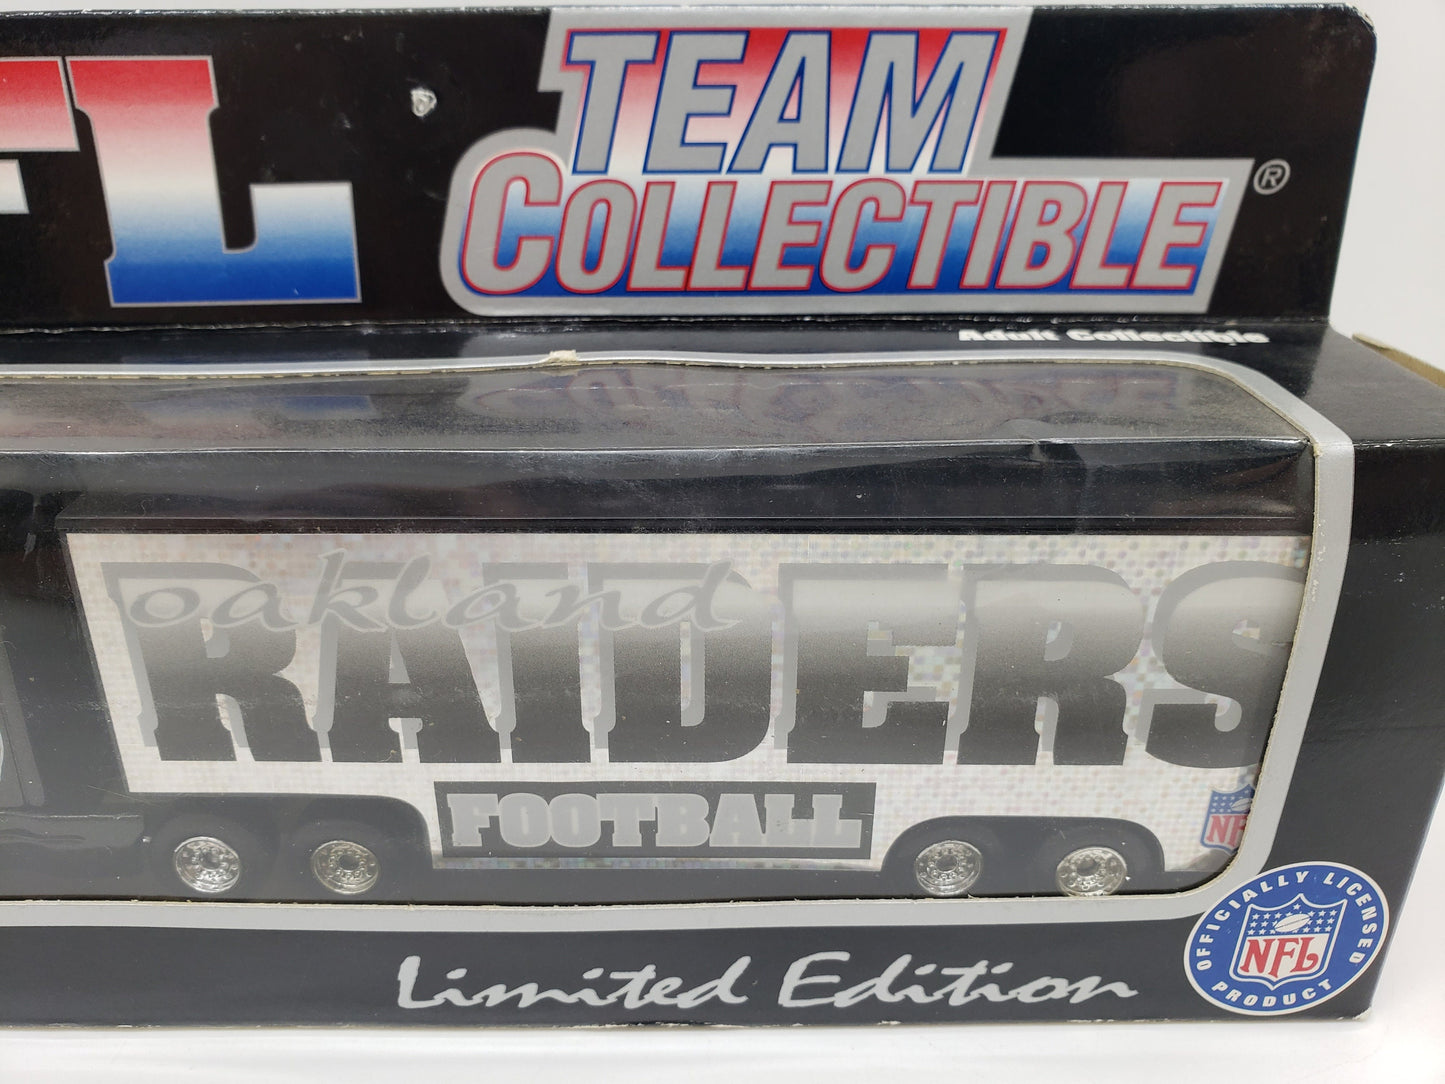 Oakland Raiders Replica Transporter Silver and Black White Rose Collectable Scale Miniature Model Toy Car Perfect Birthday Gift